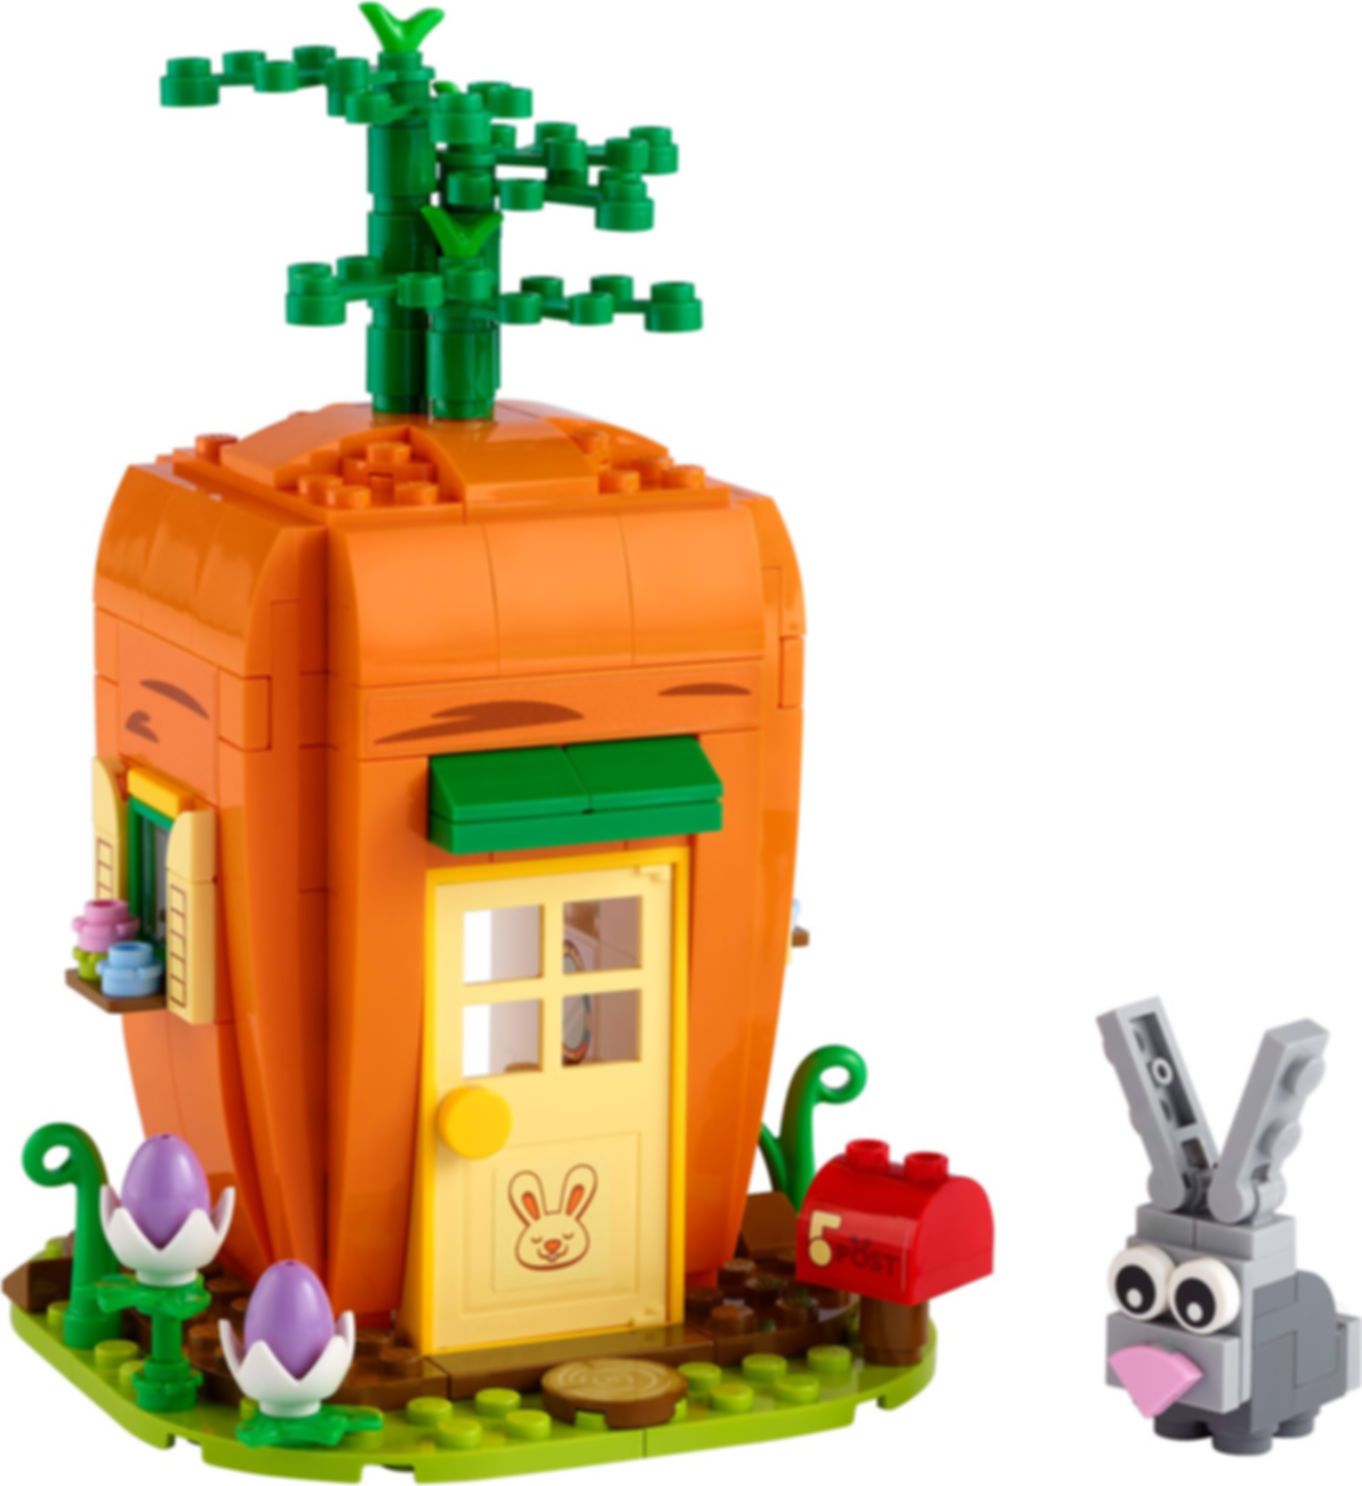 Easter Bunny's Carrot House components